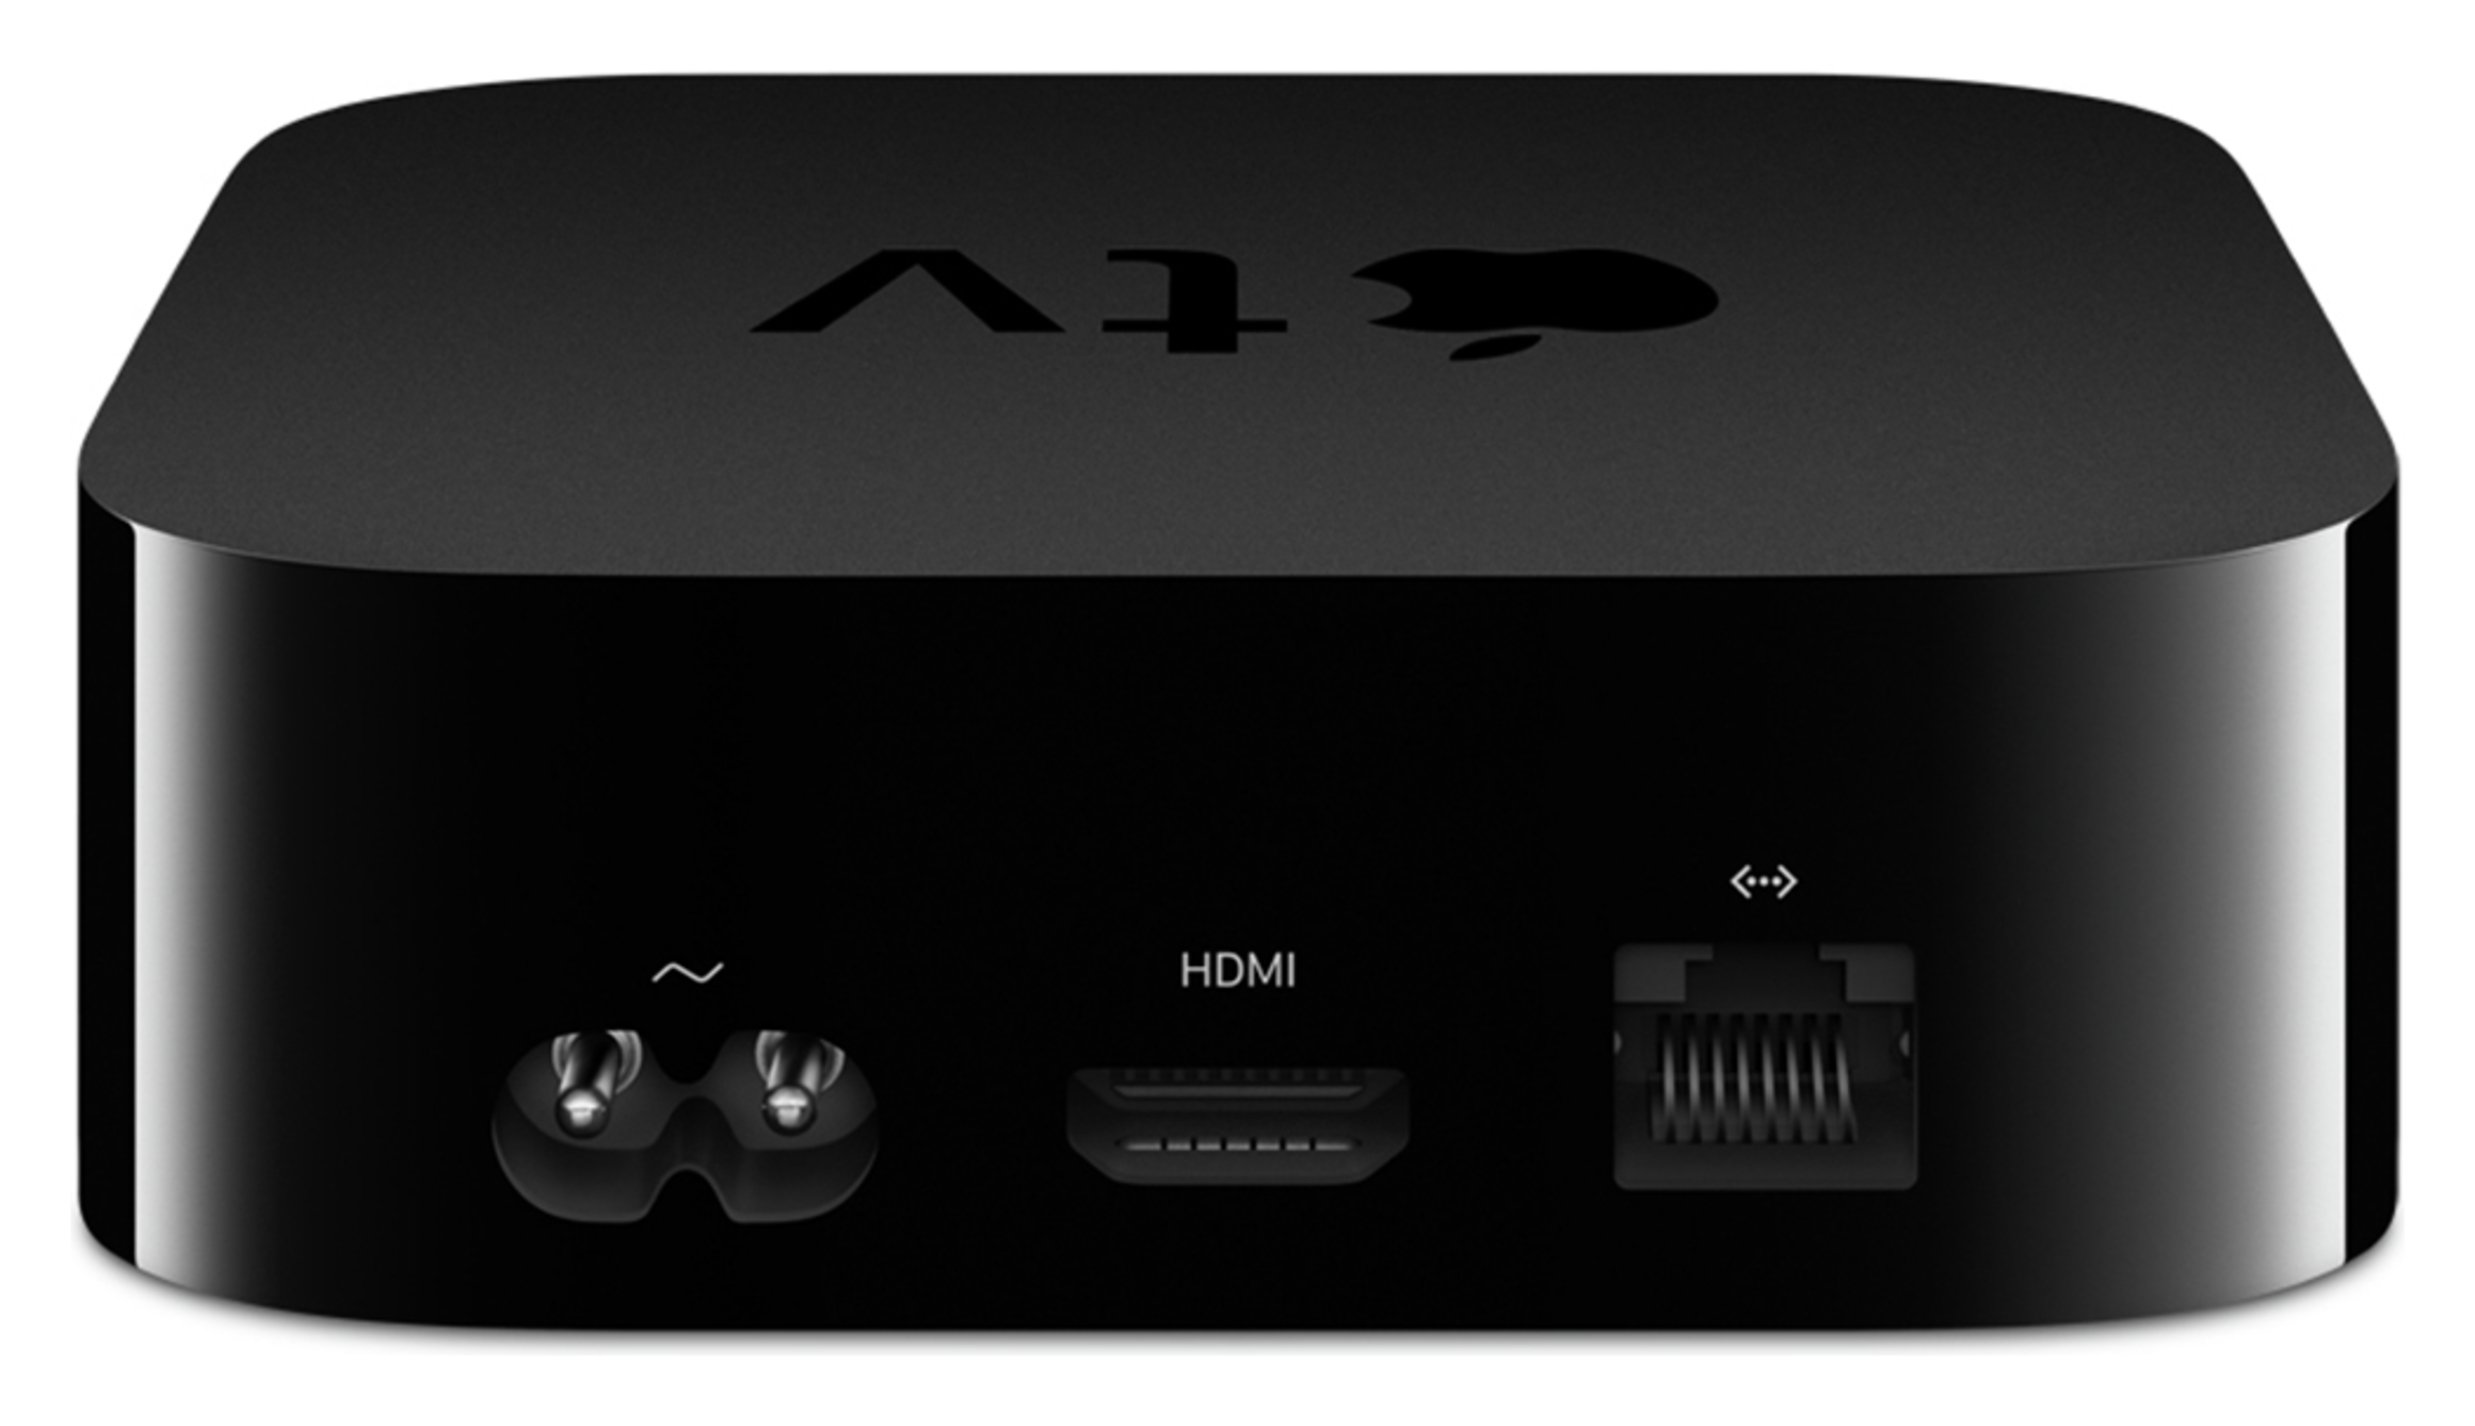 Apple TV 64GB Review